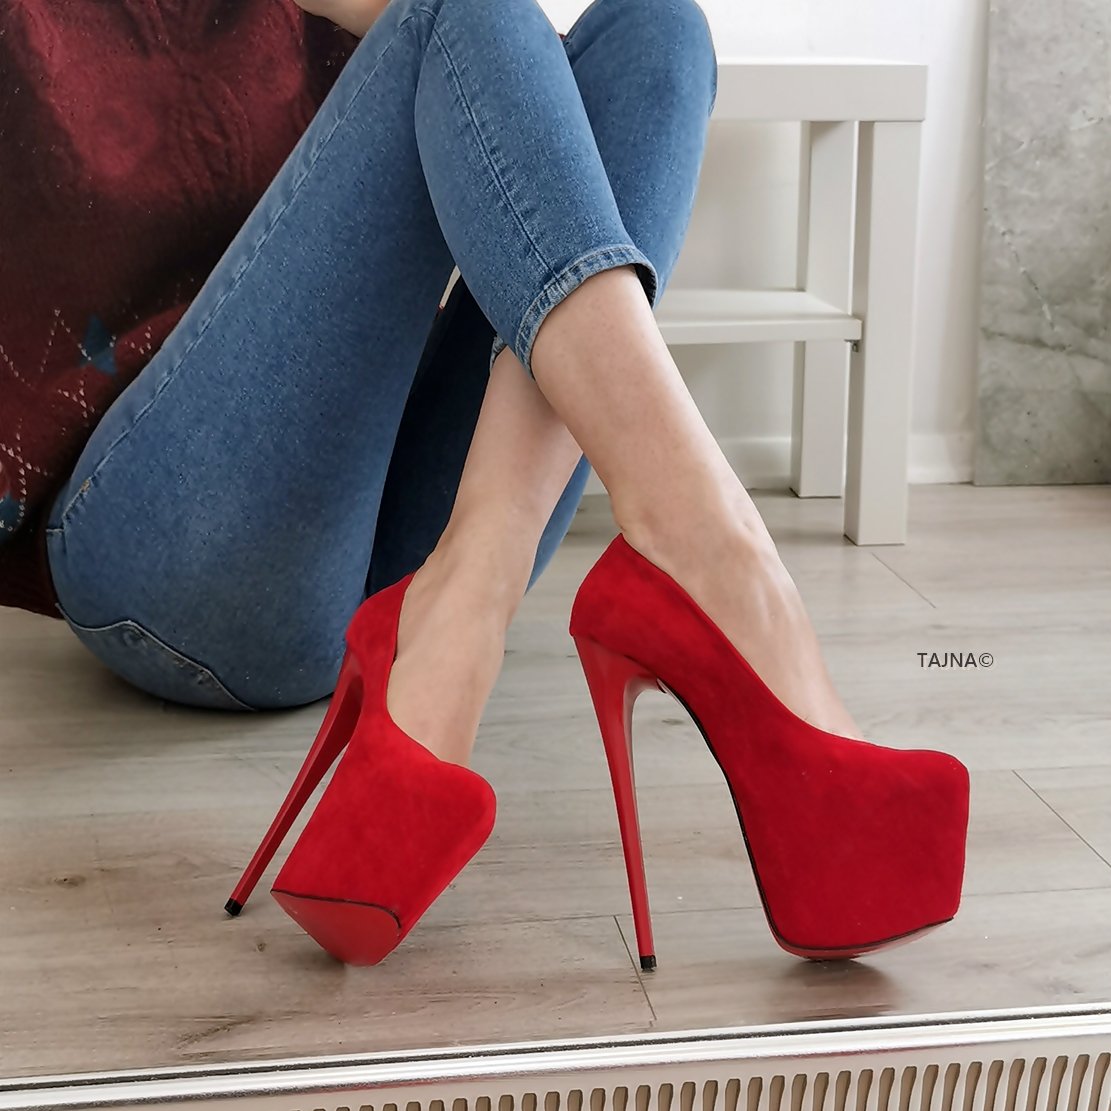 Women's handmade elegant high heels pumps shoes in red leather